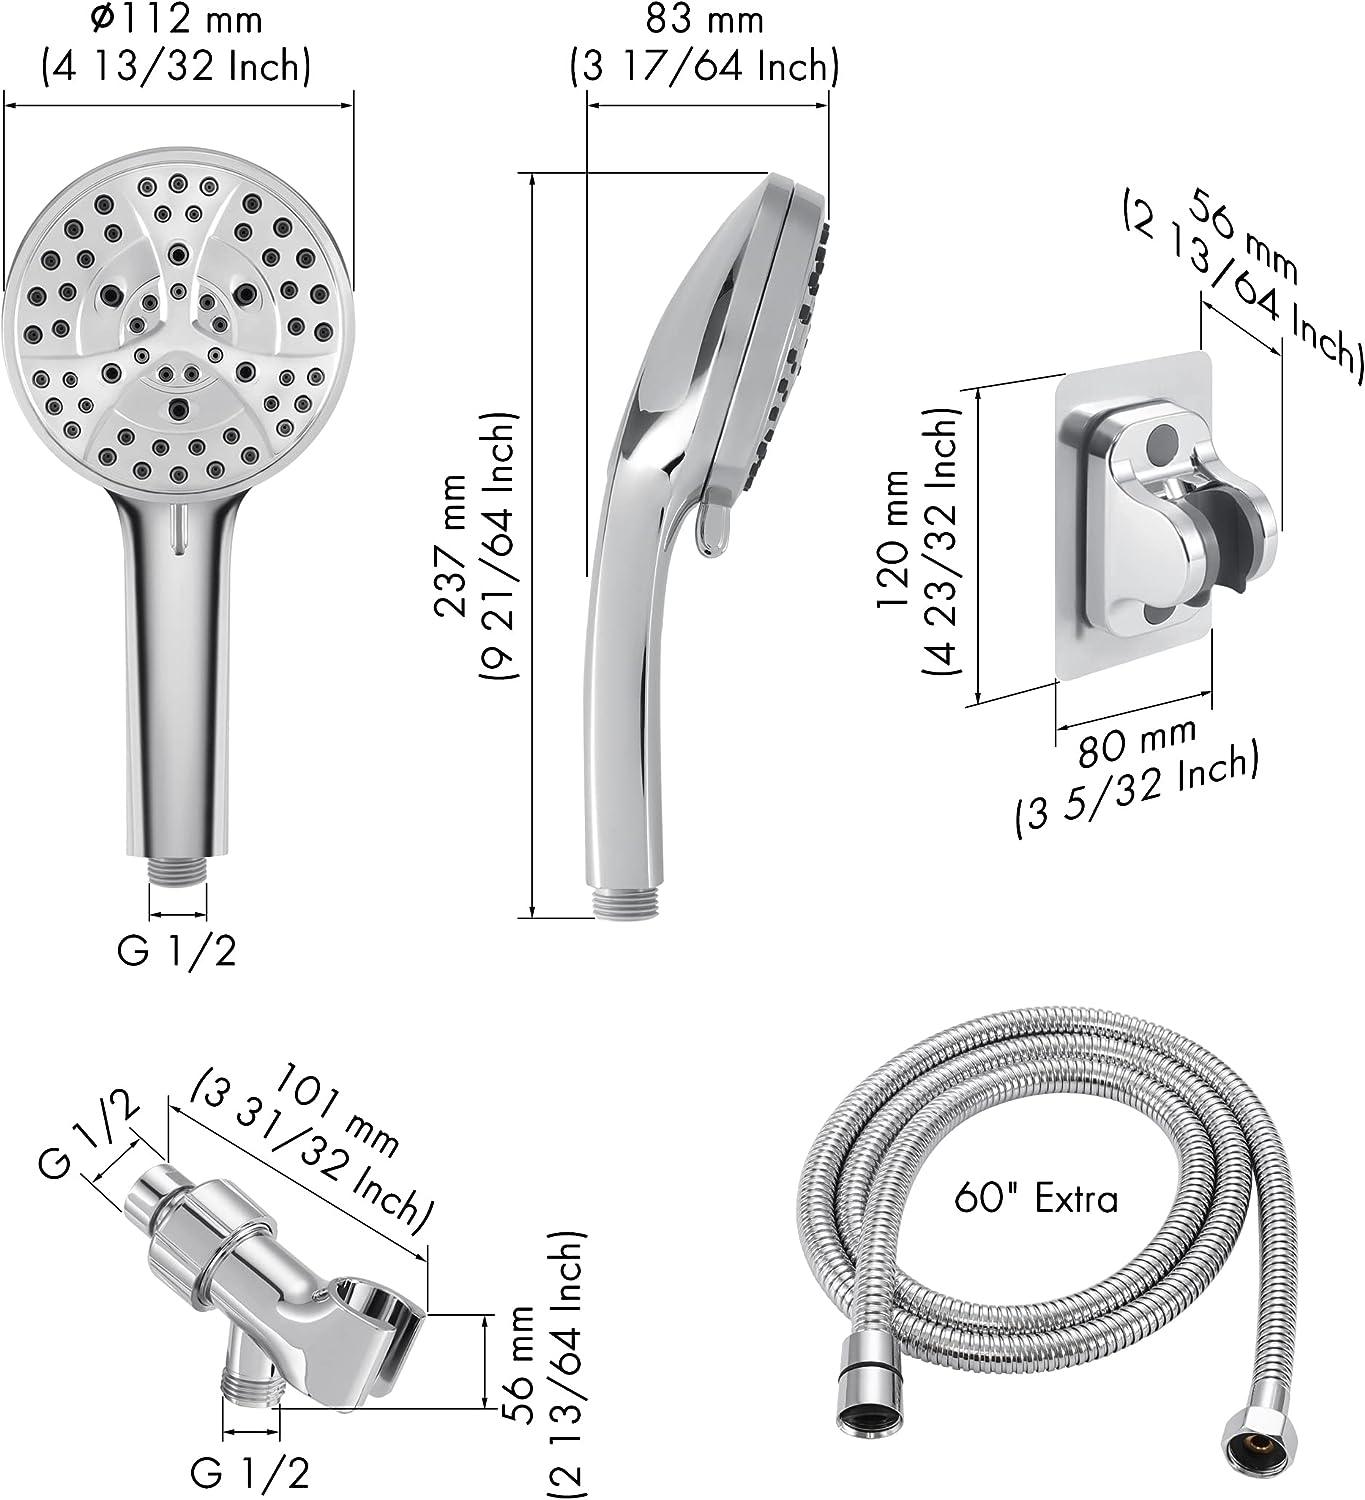 KES Shower Head and Hose, 7 Spray Pattern Shower Head High Pressure with Hose - Massive Discounts